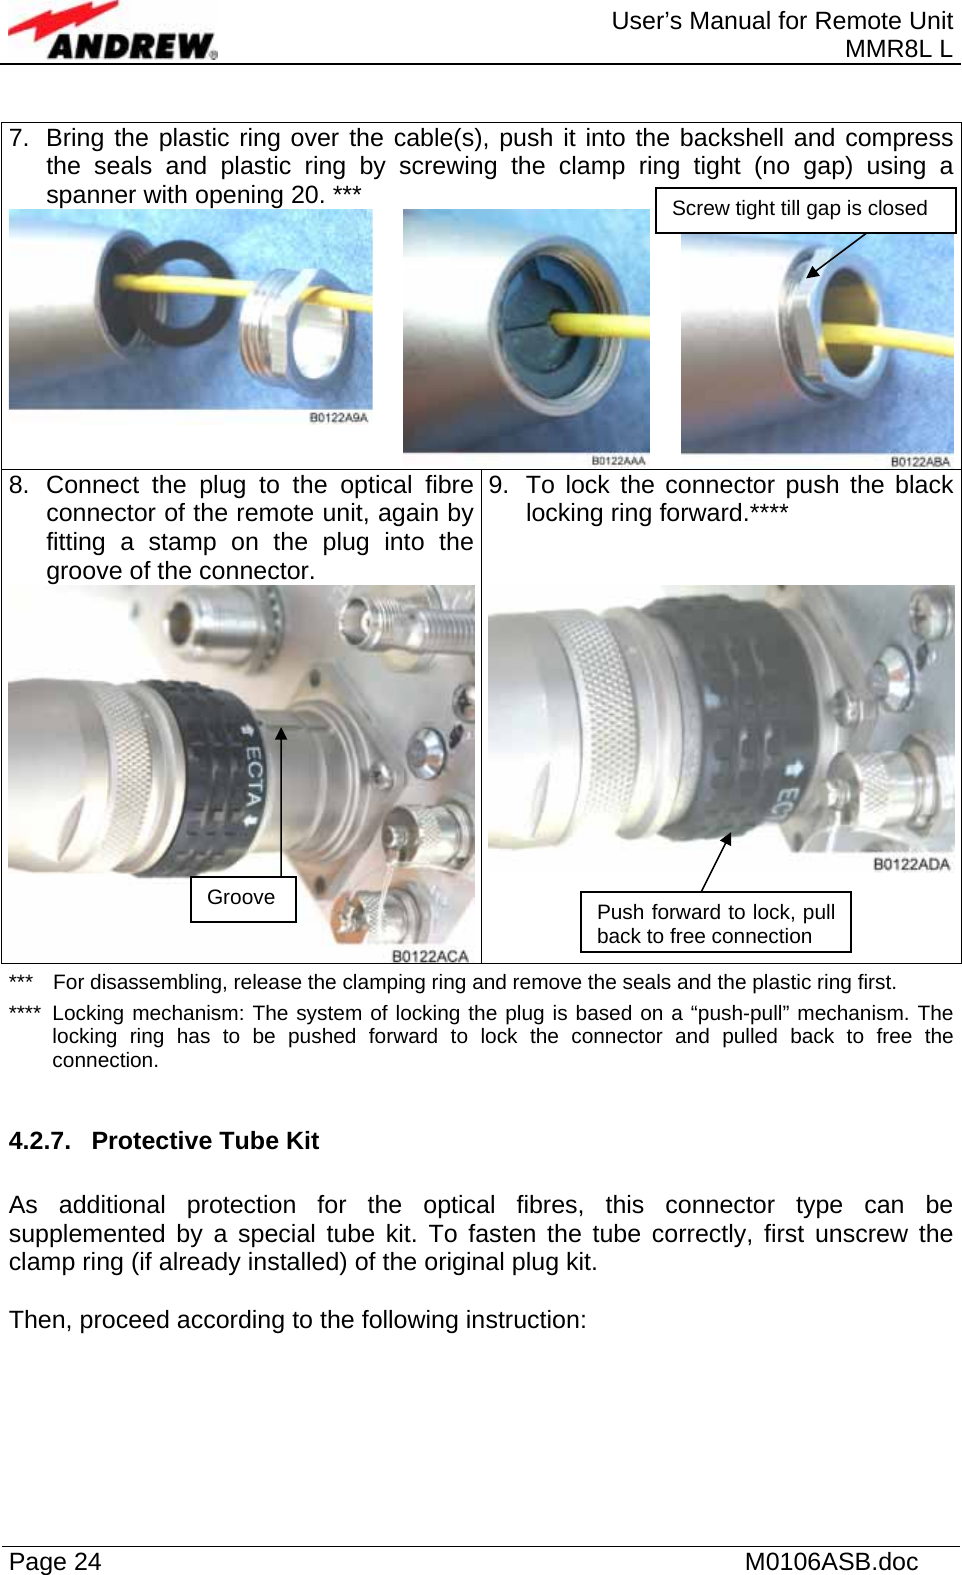  User’s Manual for Remote Unit MMR8L L Page 24    M0106ASB.doc   7.  Bring the plastic ring over the cable(s), push it into the backshell and compress the seals and plastic ring by screwing the clamp ring tight (no gap) using a spanner with opening 20. ***   8.  Connect the plug to the optical fibre connector of the remote unit, again by fitting a stamp on the plug into the groove of the connector.  9.  To lock the connector push the black locking ring forward.****  ***  For disassembling, release the clamping ring and remove the seals and the plastic ring first. ****  Locking mechanism: The system of locking the plug is based on a “push-pull” mechanism. The locking ring has to be pushed forward to lock the connector and pulled back to free the connection.  4.2.7.  Protective Tube Kit  As additional protection for the optical fibres, this connector type can be supplemented by a special tube kit. To fasten the tube correctly, first unscrew the clamp ring (if already installed) of the original plug kit.   Then, proceed according to the following instruction:   Groove  Push forward to lock, pull back to free connection Screw tight till gap is closed 